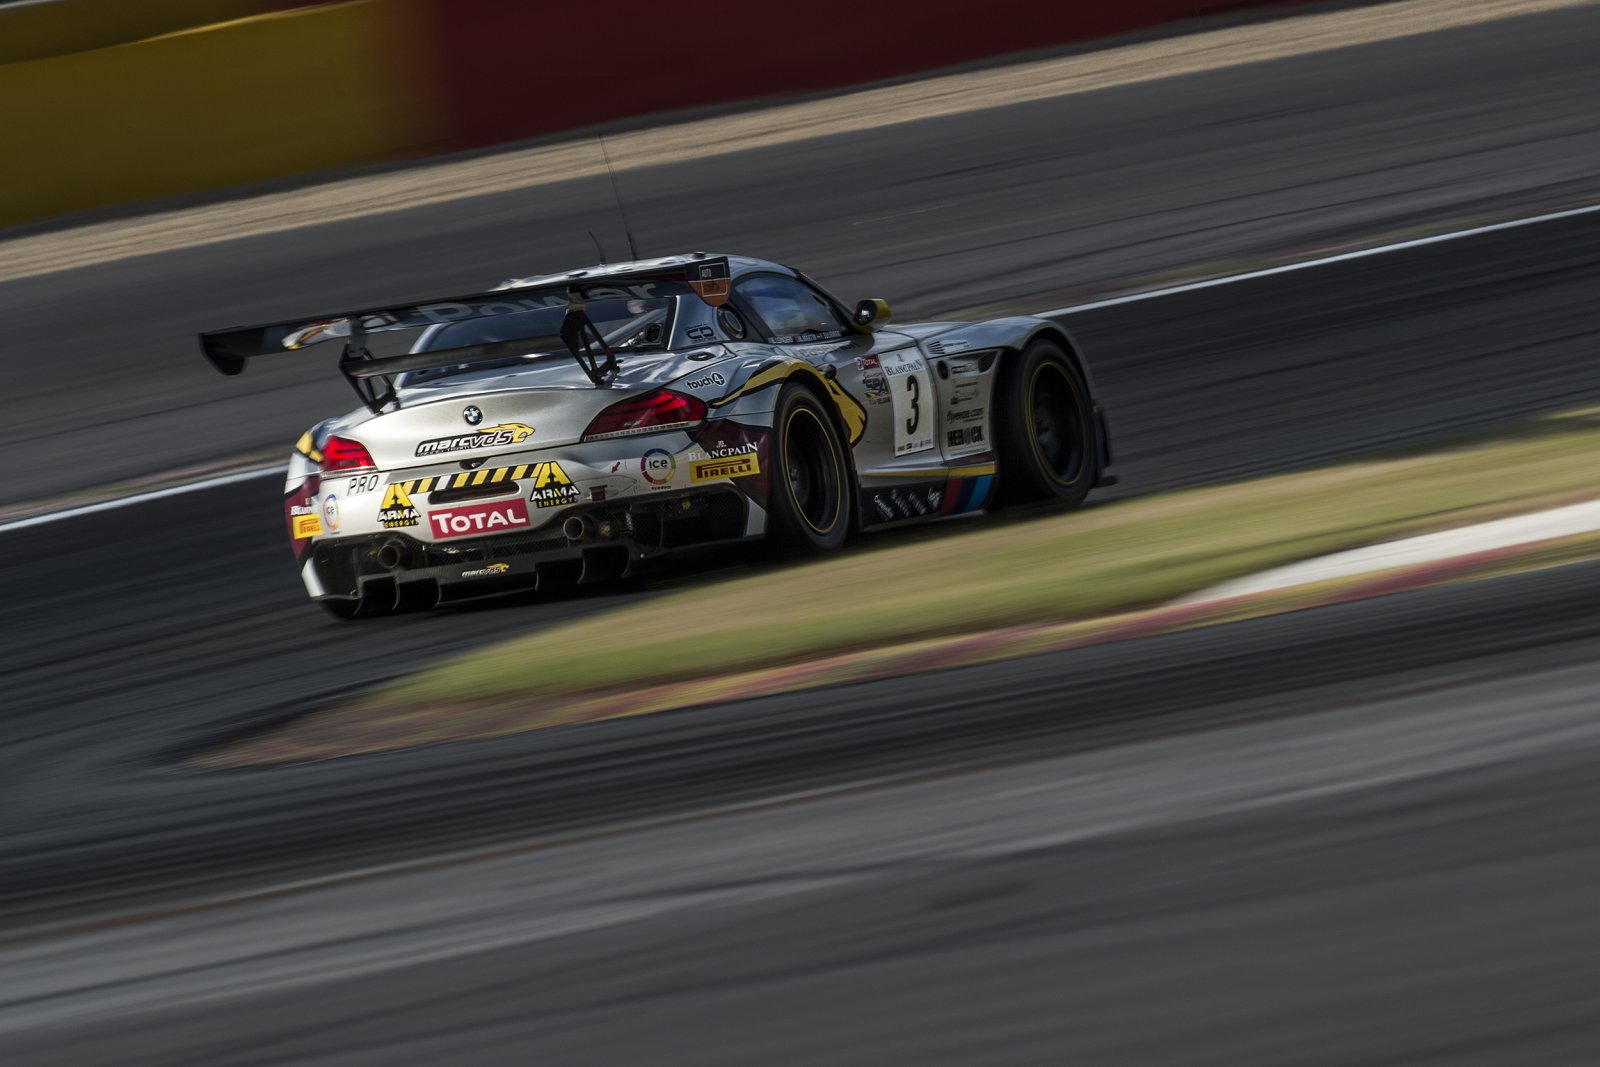 BMW Sports Trophy Team Marc VDS with strong driver line-up for Total 24 hours of Spa